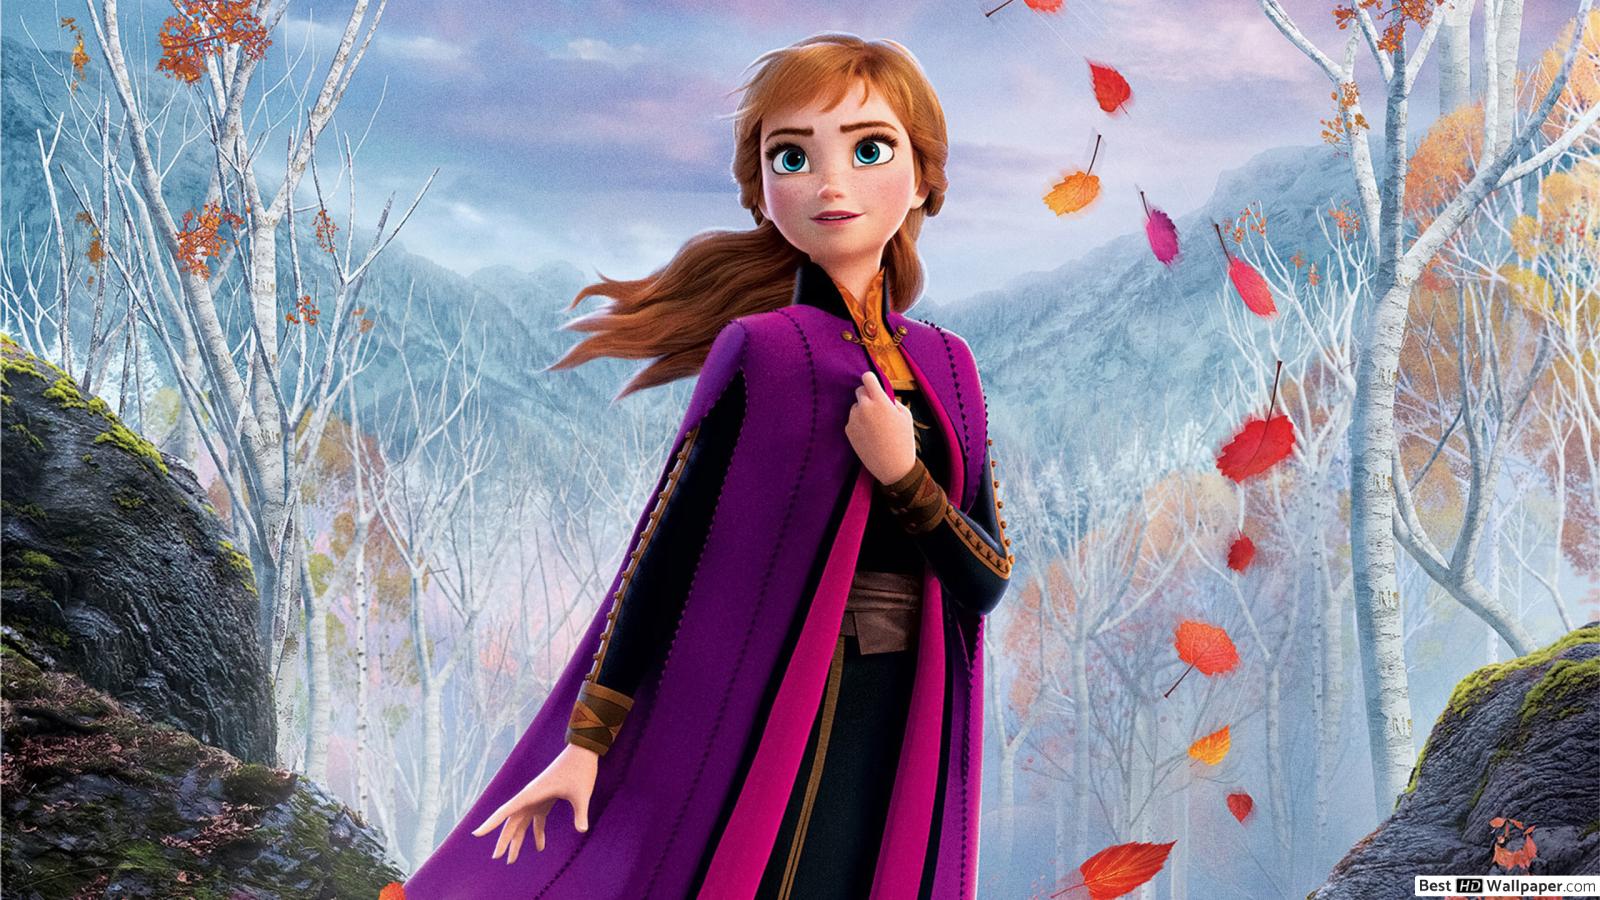 Princess Anna with flying autumn leaves at the enchanted forest HD wallpaper download